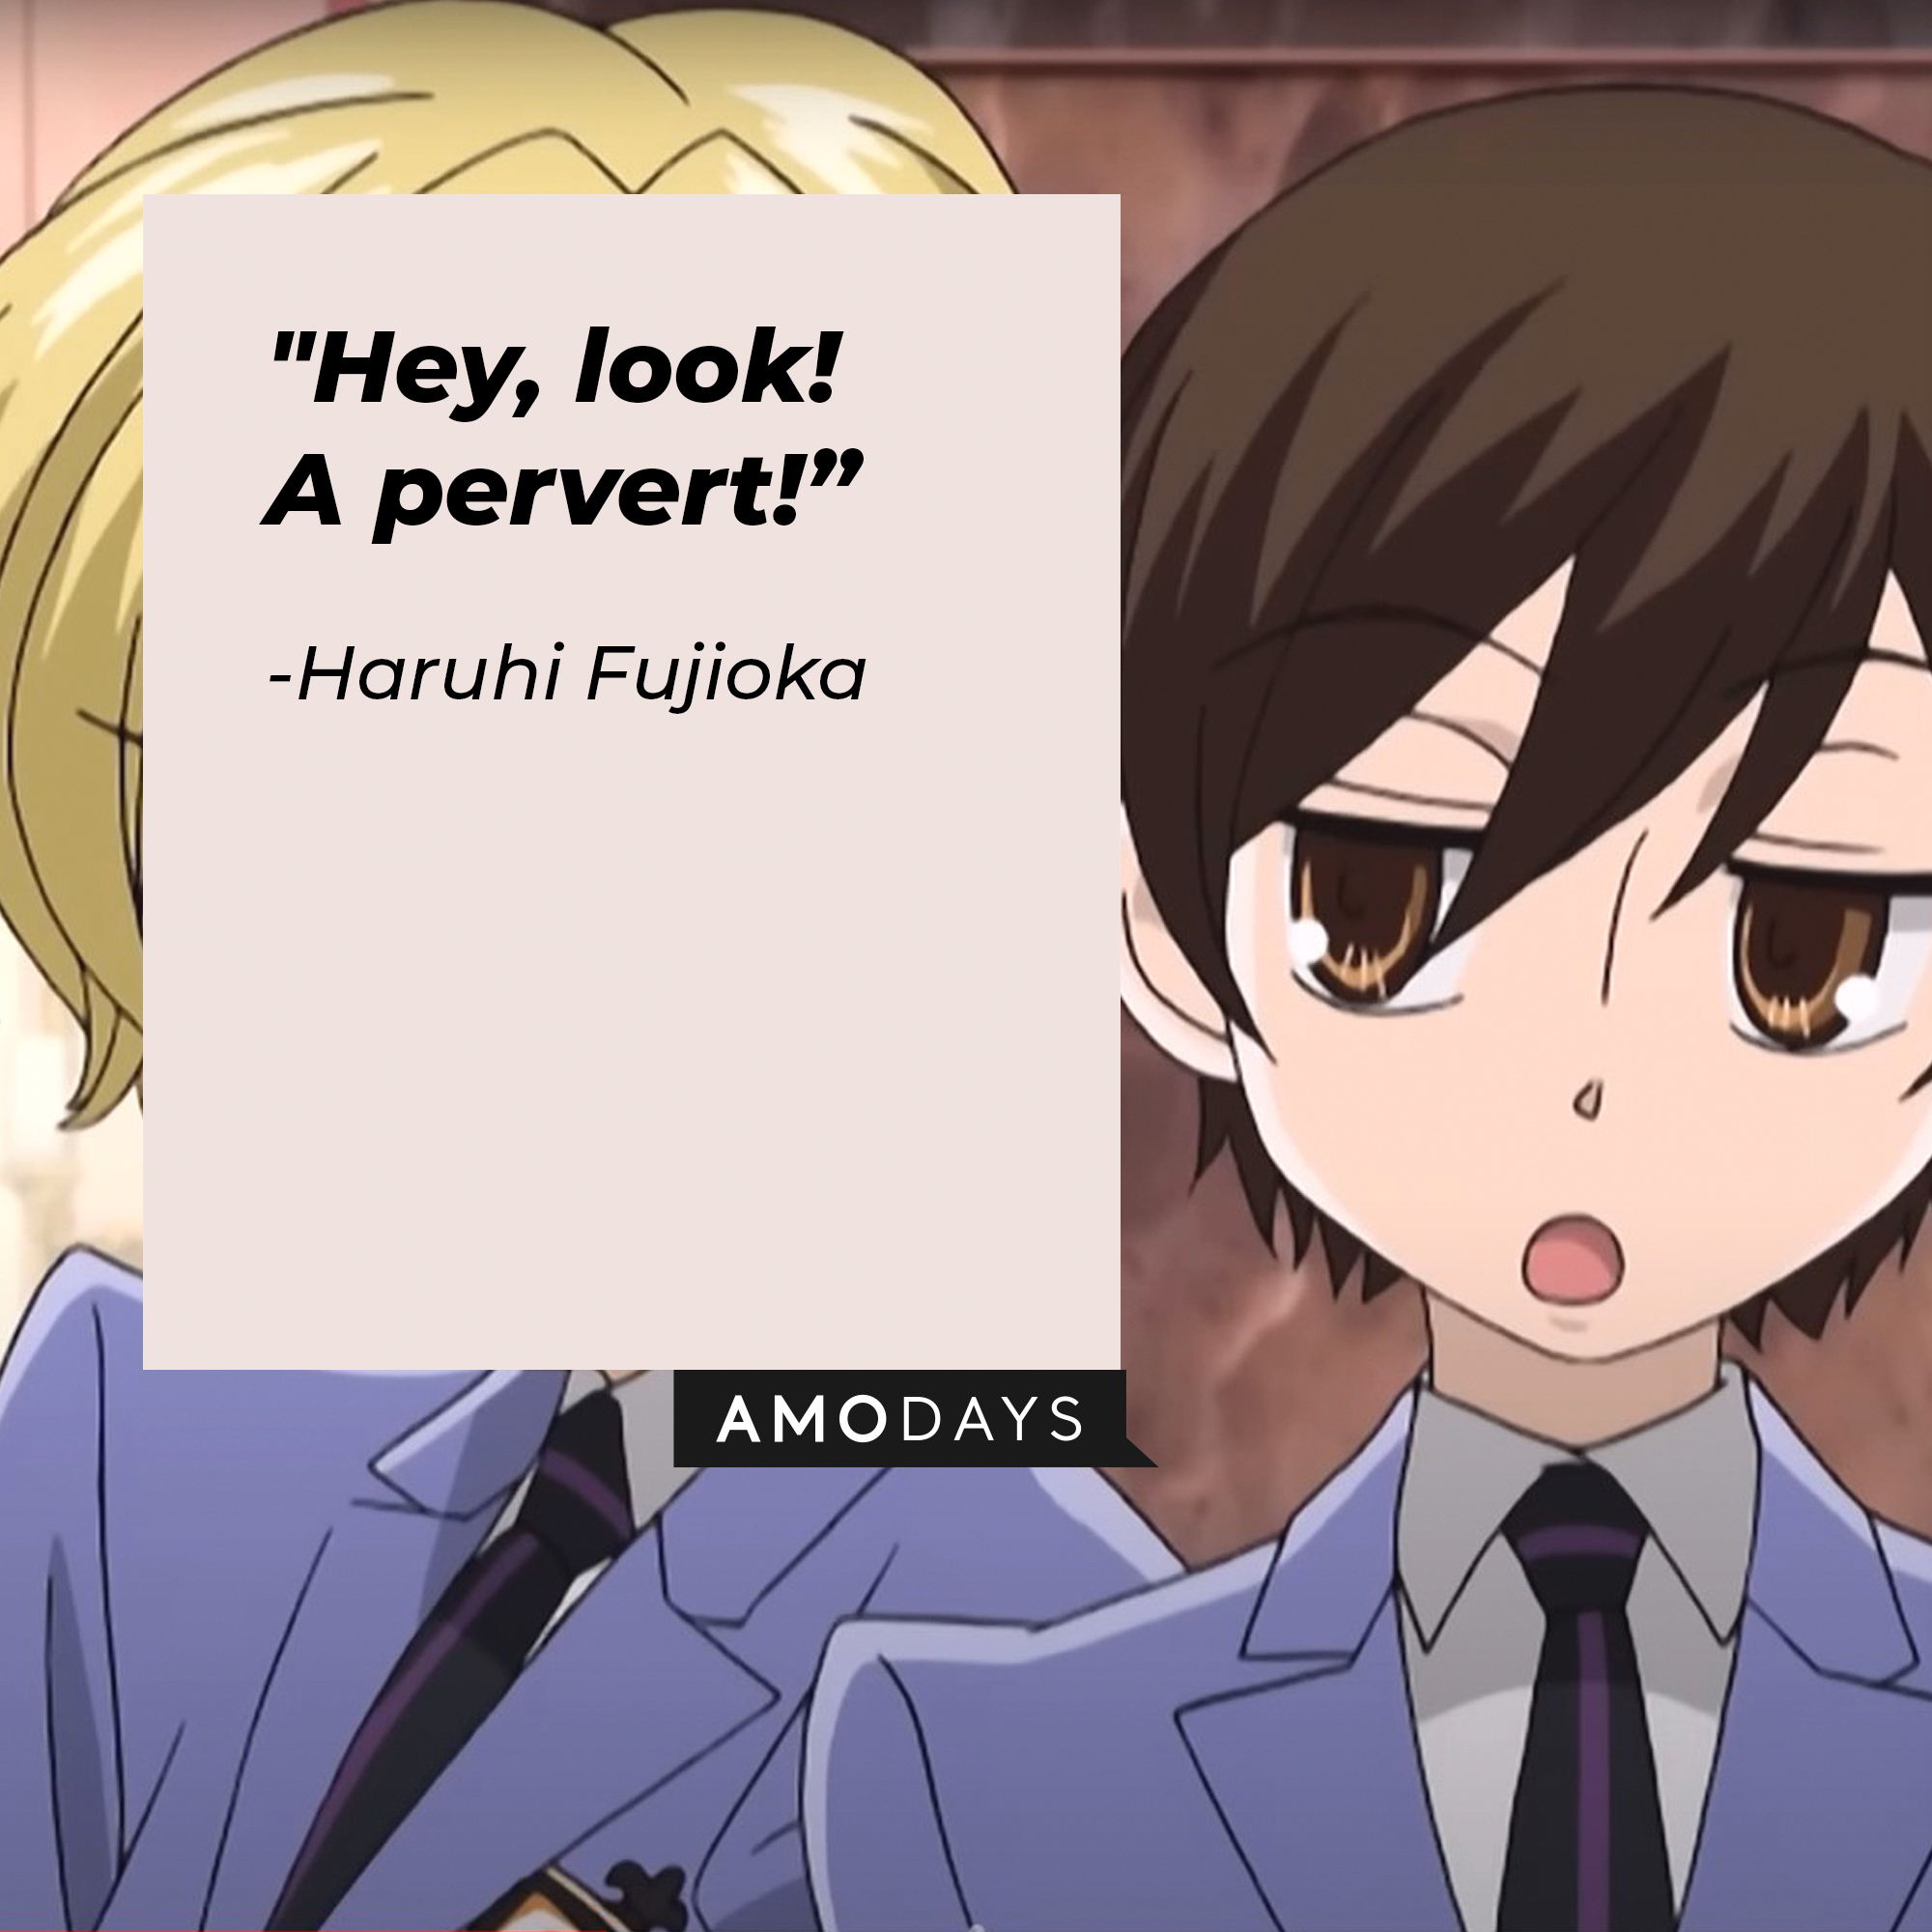 A picture of the anime character Haruhi Fujioka with a quote by her that reads, "Hey, look! A pervert!” | Image: facebook.com/theouranhostclub